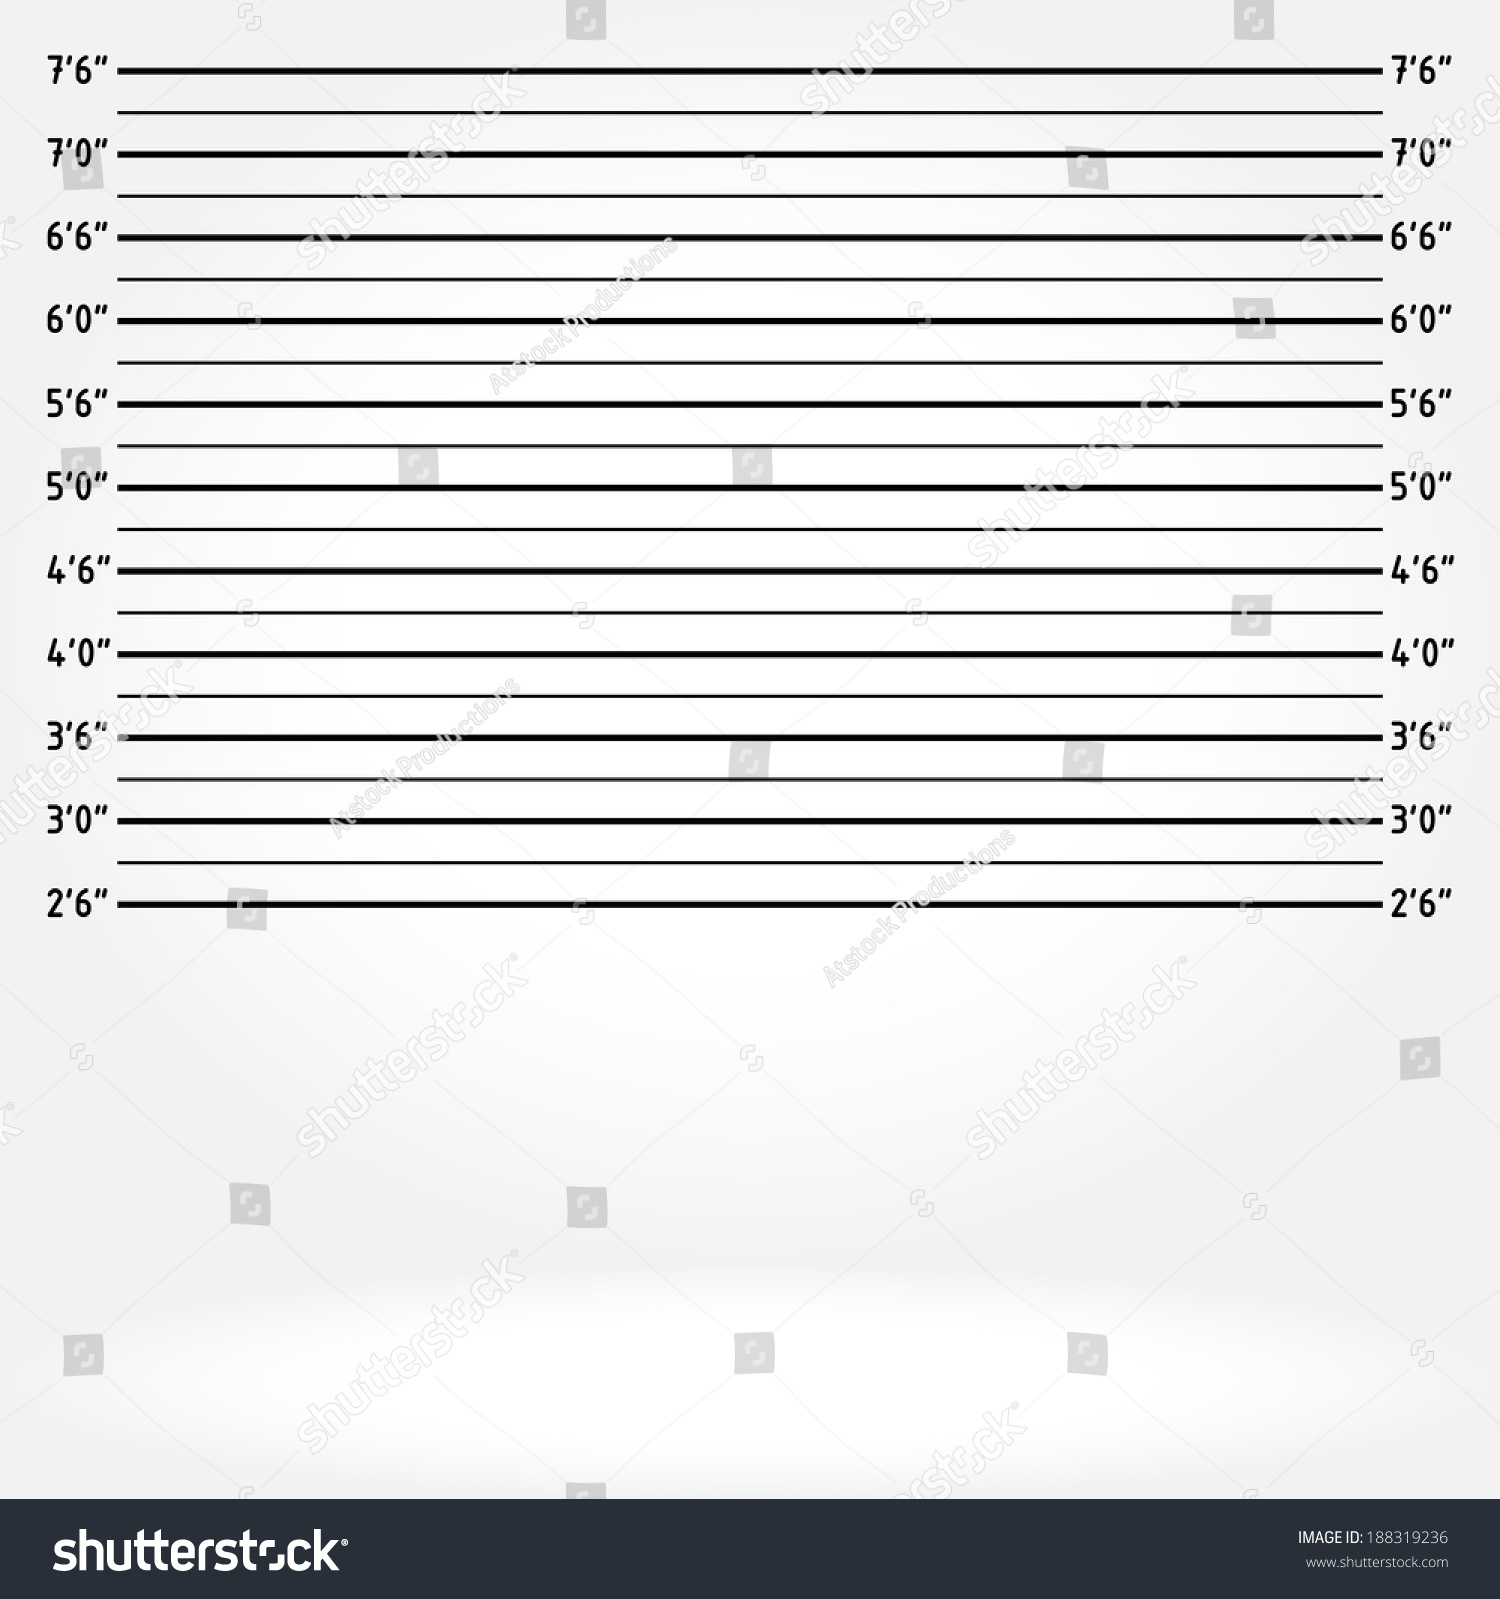 Police Lineup Mugshot Background Stock Vector (Royalty Free) 188319236 ...